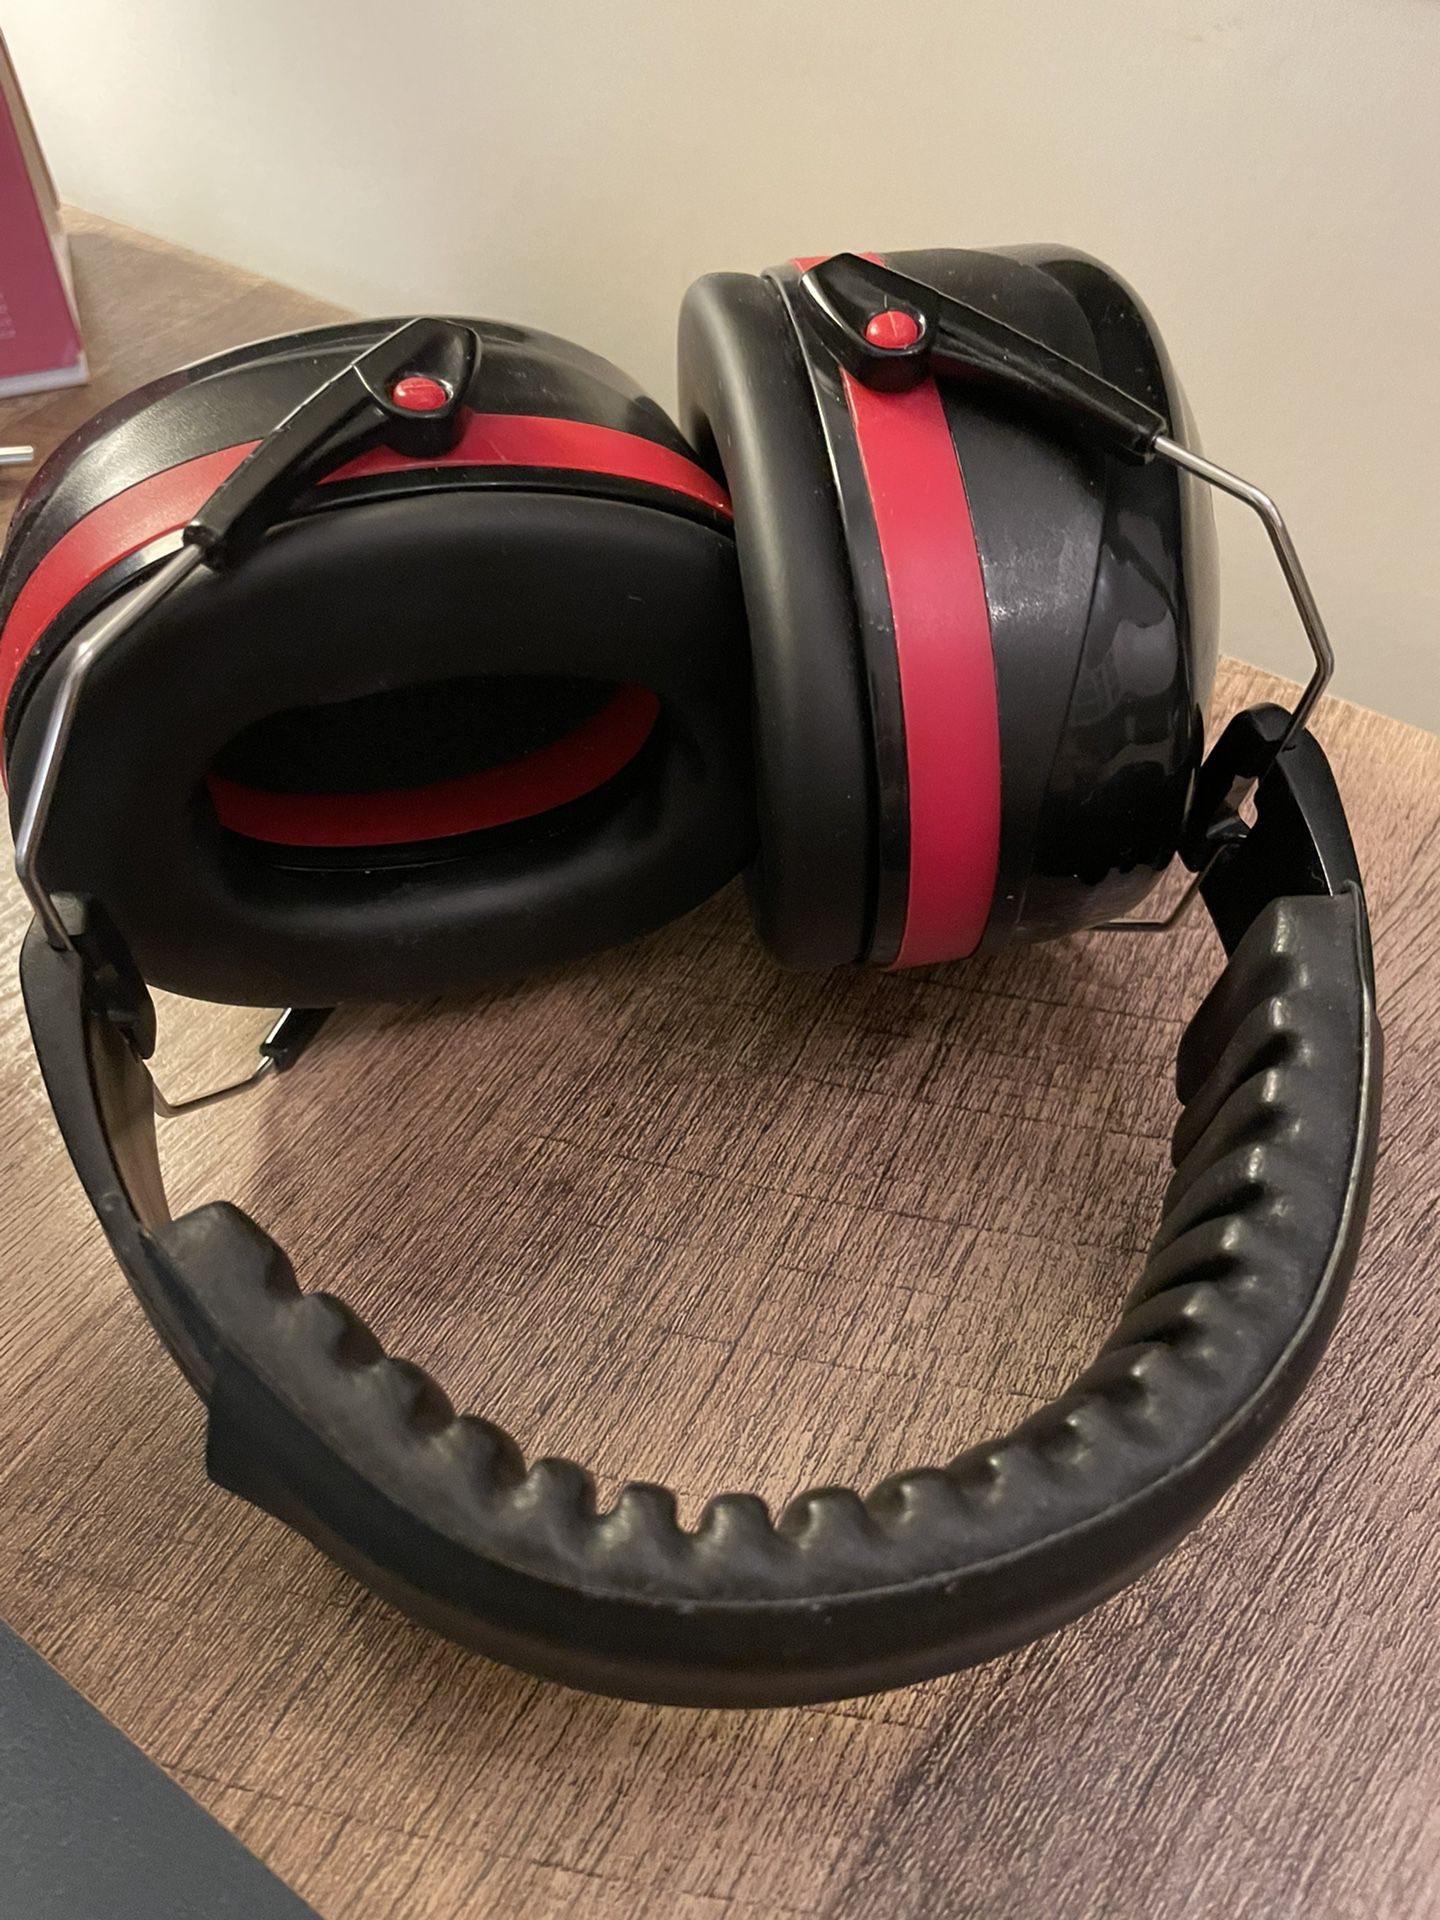 Noise Reduction Safety Ear Muffs